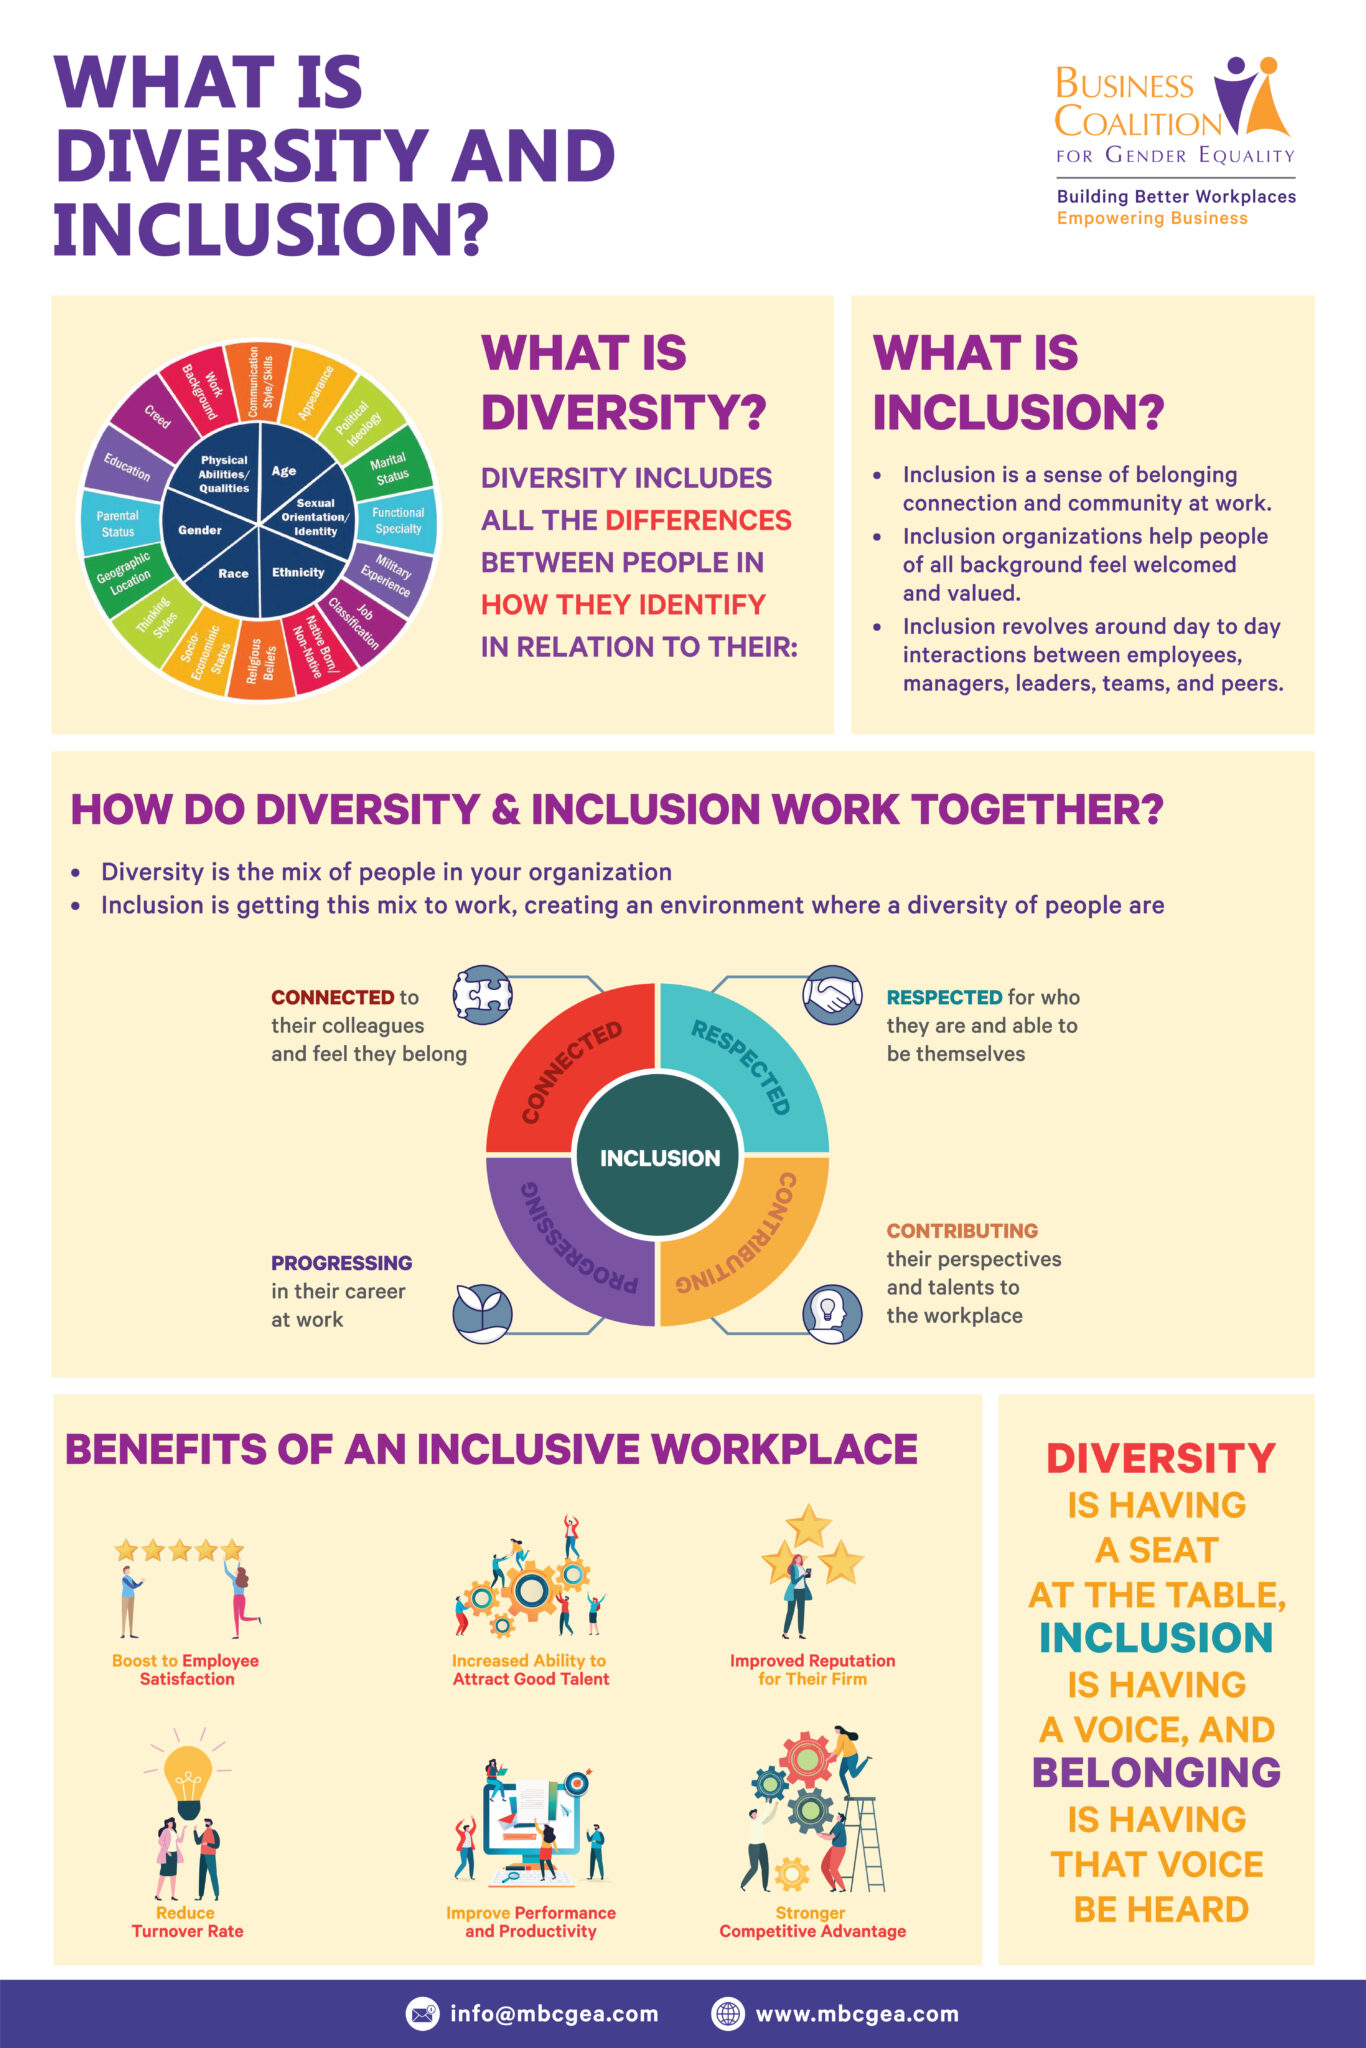 What Is Diversity And Inclusion Bcge Business Coalition For Gender Equality